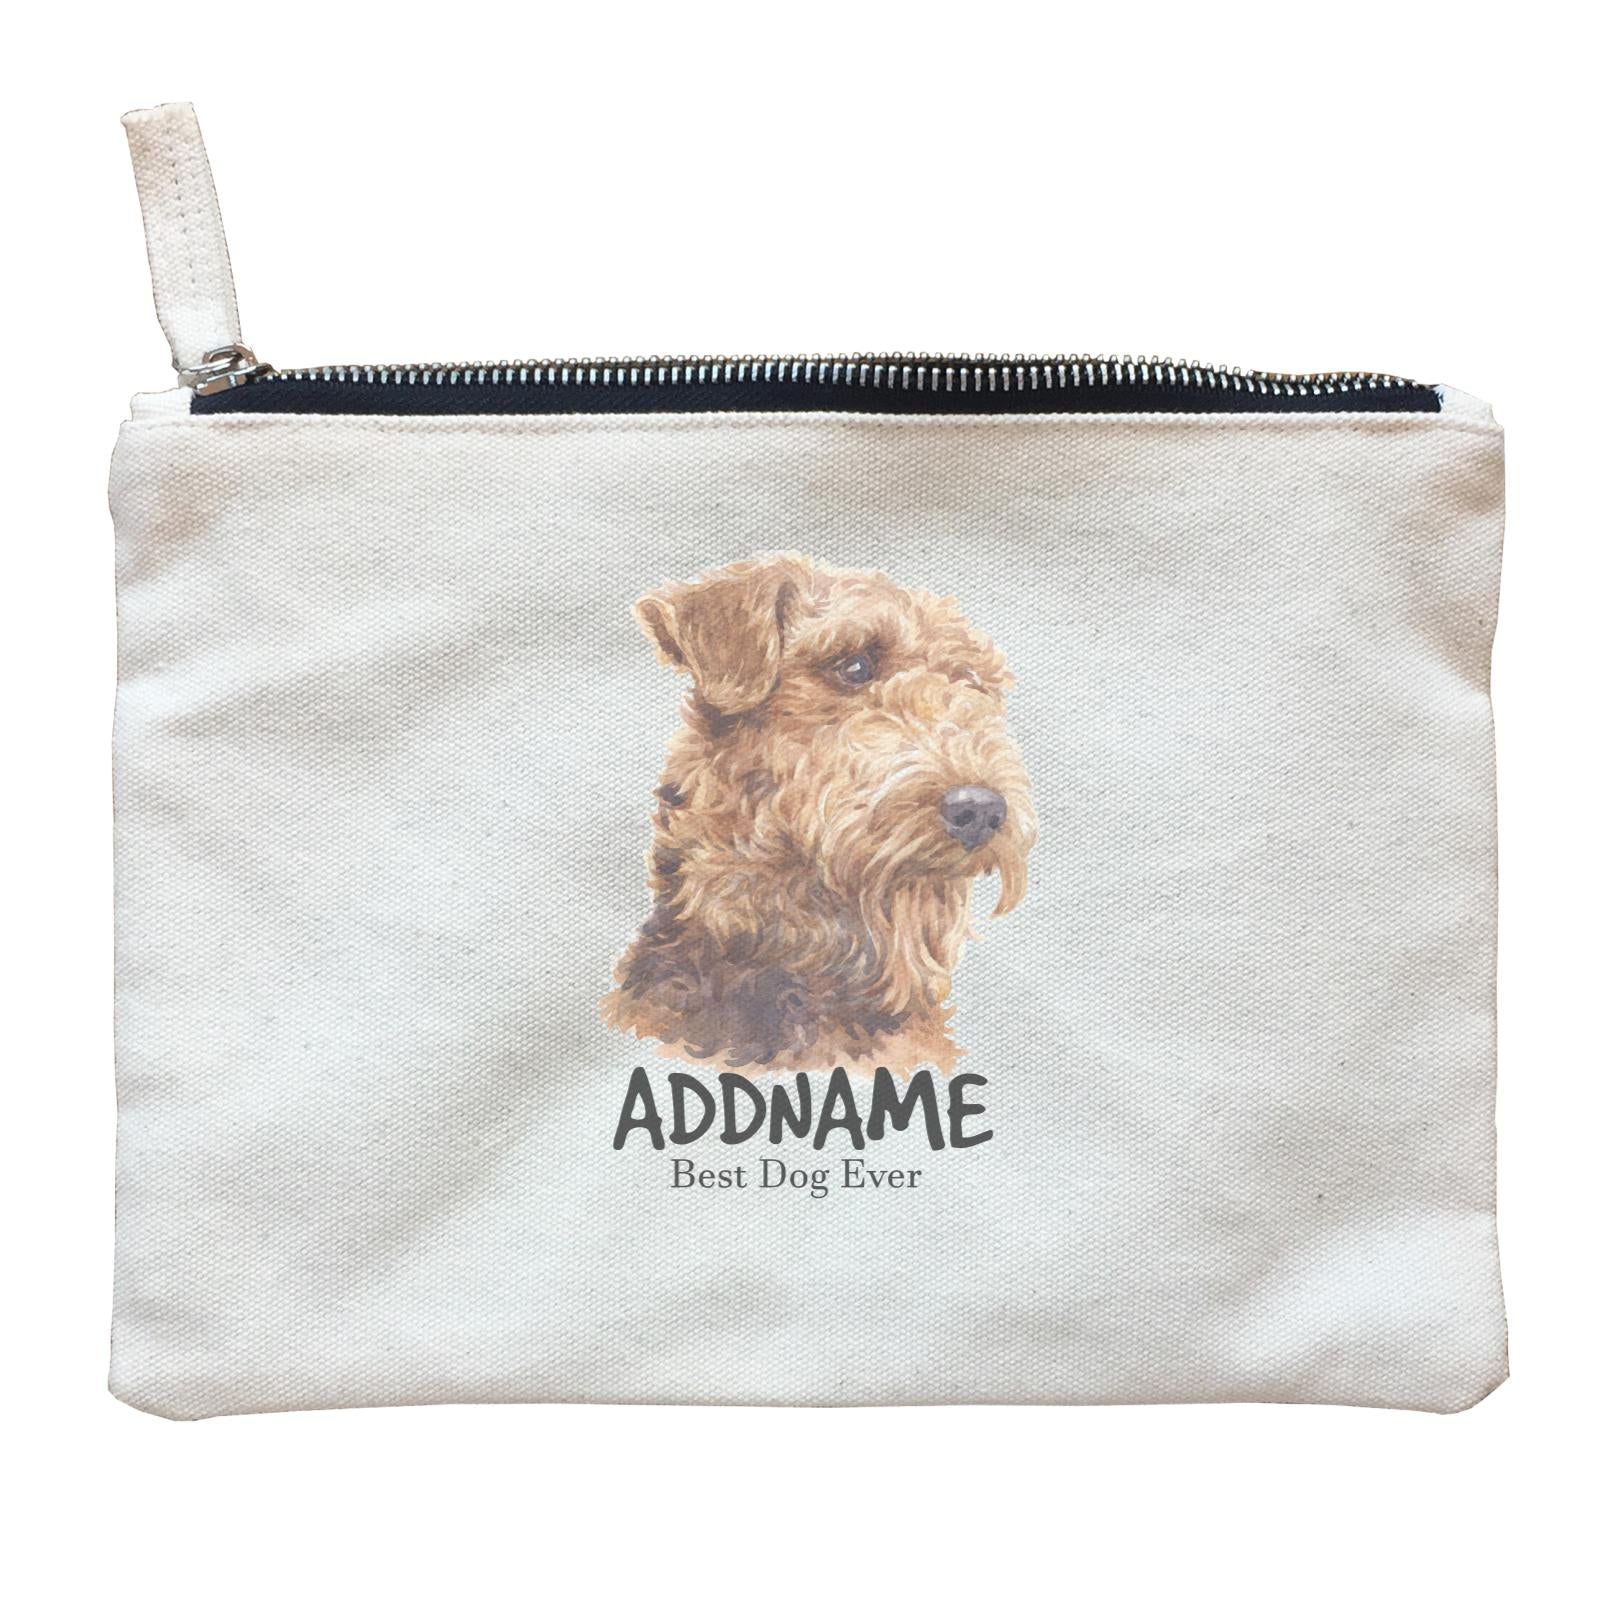 Watercolor Dog Airedale Terrier Best Dog Ever Addname Zipper Pouch